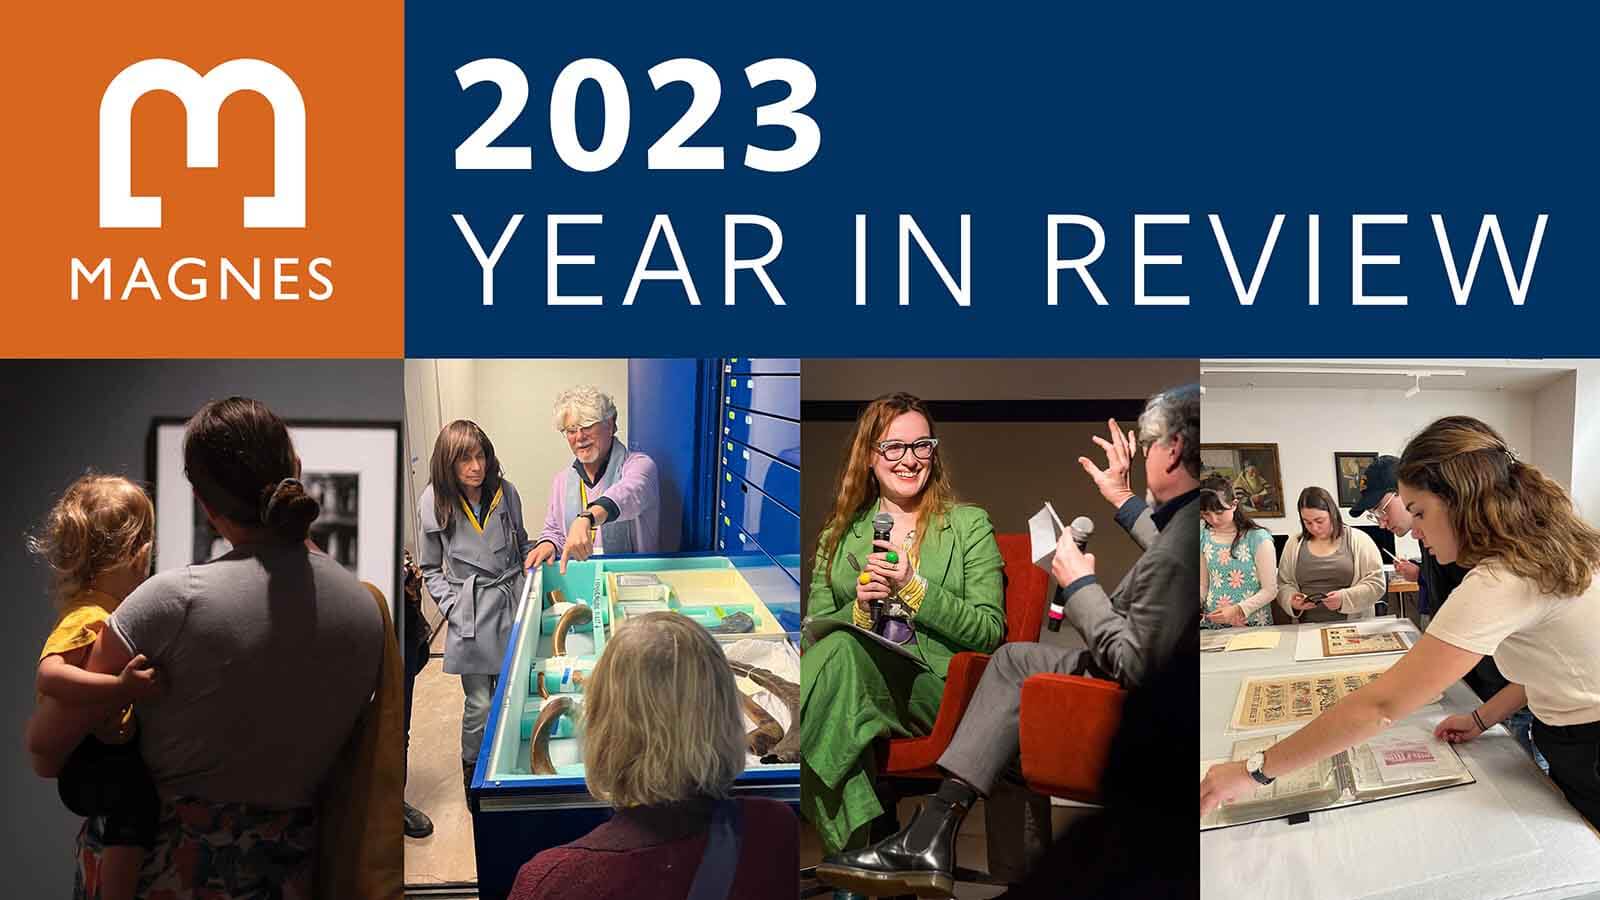 Magnes logo and text "2023 Year in Review accross top with 4 images across bottom: Young mother holding a toddler looking at a framed photograph, a man pointing to a shofar horn in a holdings drawer with 3 people looking on, a woman and man holding mics speaking in conversation, college students looking at postcard holdings on a large table.